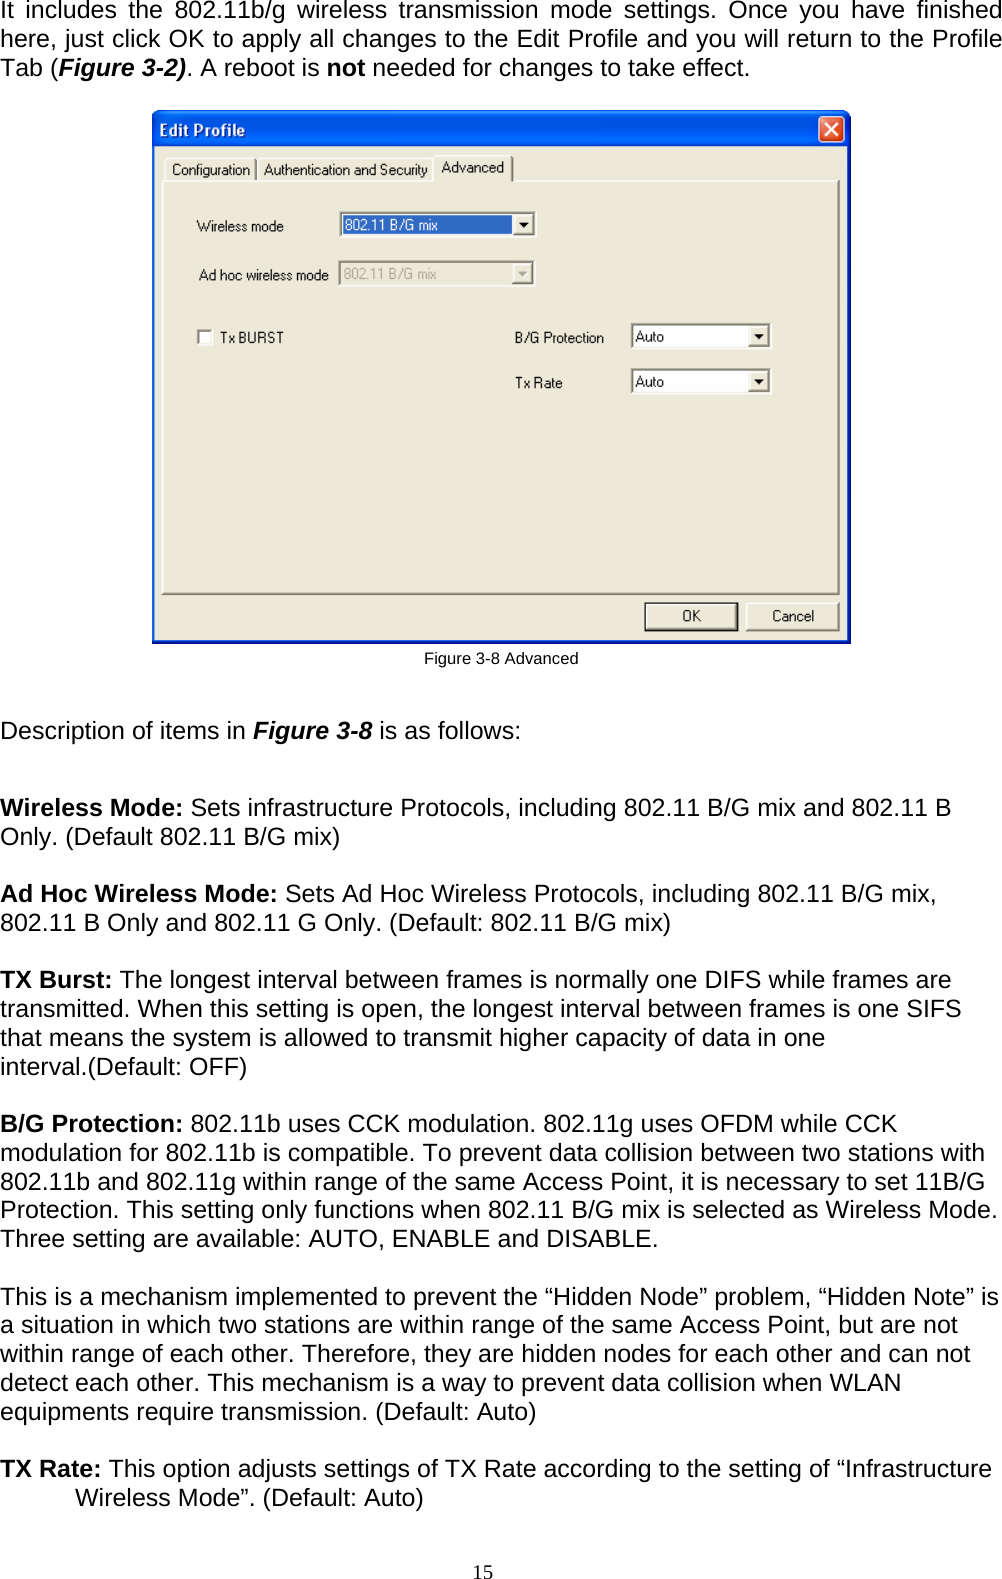 15   It includes the 802.11b/g wireless transmission mode settings. Once you have finished here, just click OK to apply all changes to the Edit Profile and you will return to the Profile Tab (Figure 3-2). A reboot is not needed for changes to take effect.     Figure 3-8 Advanced  Description of items in Figure 3-8 is as follows:  Wireless Mode: Sets infrastructure Protocols, including 802.11 B/G mix and 802.11 B Only. (Default 802.11 B/G mix)  Ad Hoc Wireless Mode: Sets Ad Hoc Wireless Protocols, including 802.11 B/G mix, 802.11 B Only and 802.11 G Only. (Default: 802.11 B/G mix)  TX Burst: The longest interval between frames is normally one DIFS while frames are transmitted. When this setting is open, the longest interval between frames is one SIFS that means the system is allowed to transmit higher capacity of data in one interval.(Default: OFF)  B/G Protection: 802.11b uses CCK modulation. 802.11g uses OFDM while CCK modulation for 802.11b is compatible. To prevent data collision between two stations with 802.11b and 802.11g within range of the same Access Point, it is necessary to set 11B/G Protection. This setting only functions when 802.11 B/G mix is selected as Wireless Mode. Three setting are available: AUTO, ENABLE and DISABLE.  This is a mechanism implemented to prevent the “Hidden Node” problem, “Hidden Note” is a situation in which two stations are within range of the same Access Point, but are not within range of each other. Therefore, they are hidden nodes for each other and can not detect each other. This mechanism is a way to prevent data collision when WLAN equipments require transmission. (Default: Auto)  TX Rate: This option adjusts settings of TX Rate according to the setting of “Infrastructure Wireless Mode”. (Default: Auto)  